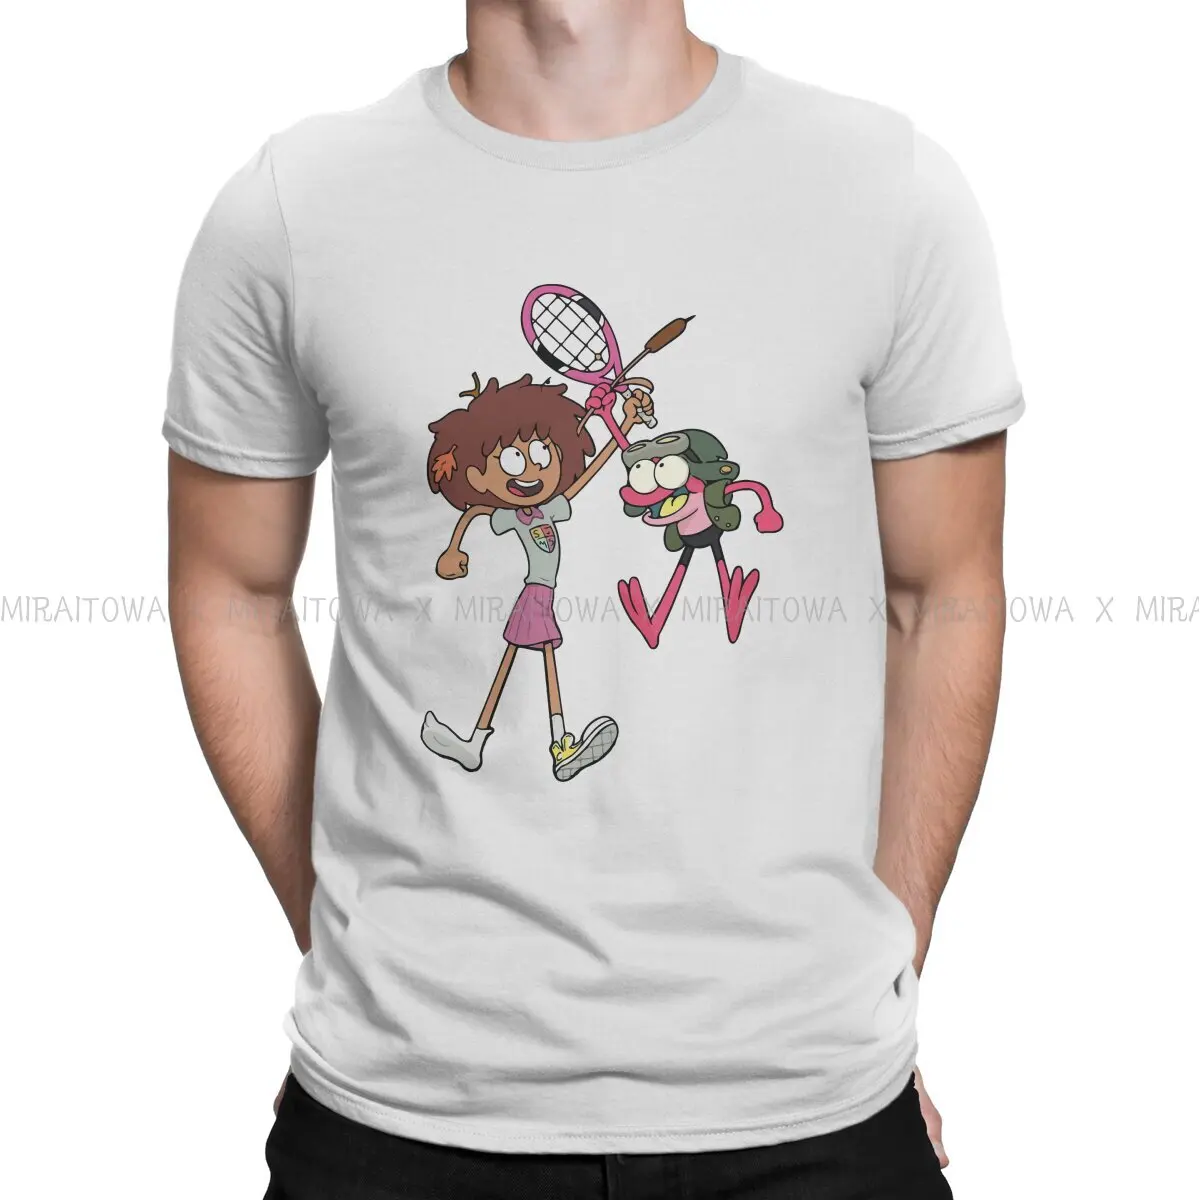 

Amphibia Frog Anime Cute Anne Boonchuy and Planter Tshirt Homme Men's Clothing Blusas Loose Cotton T Shirt For Men